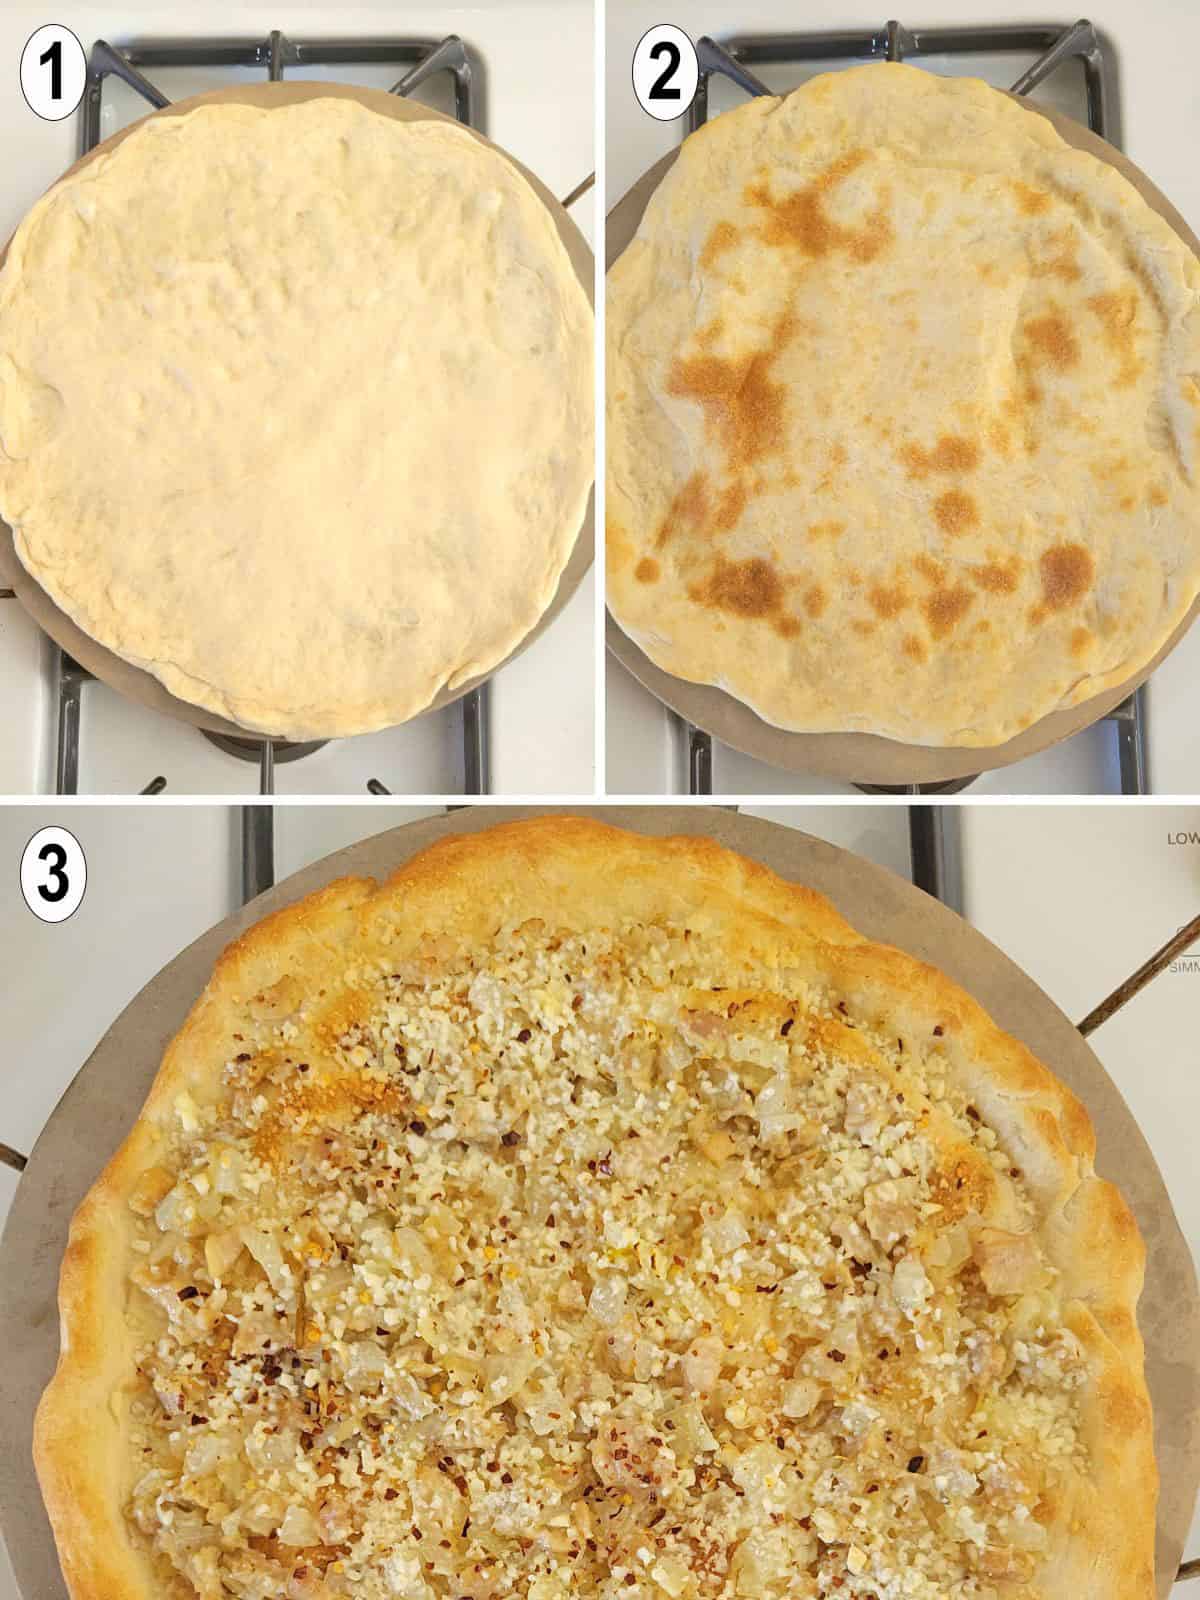 raw dough stretched on a pizza stone. par-baked. baked white pizza.